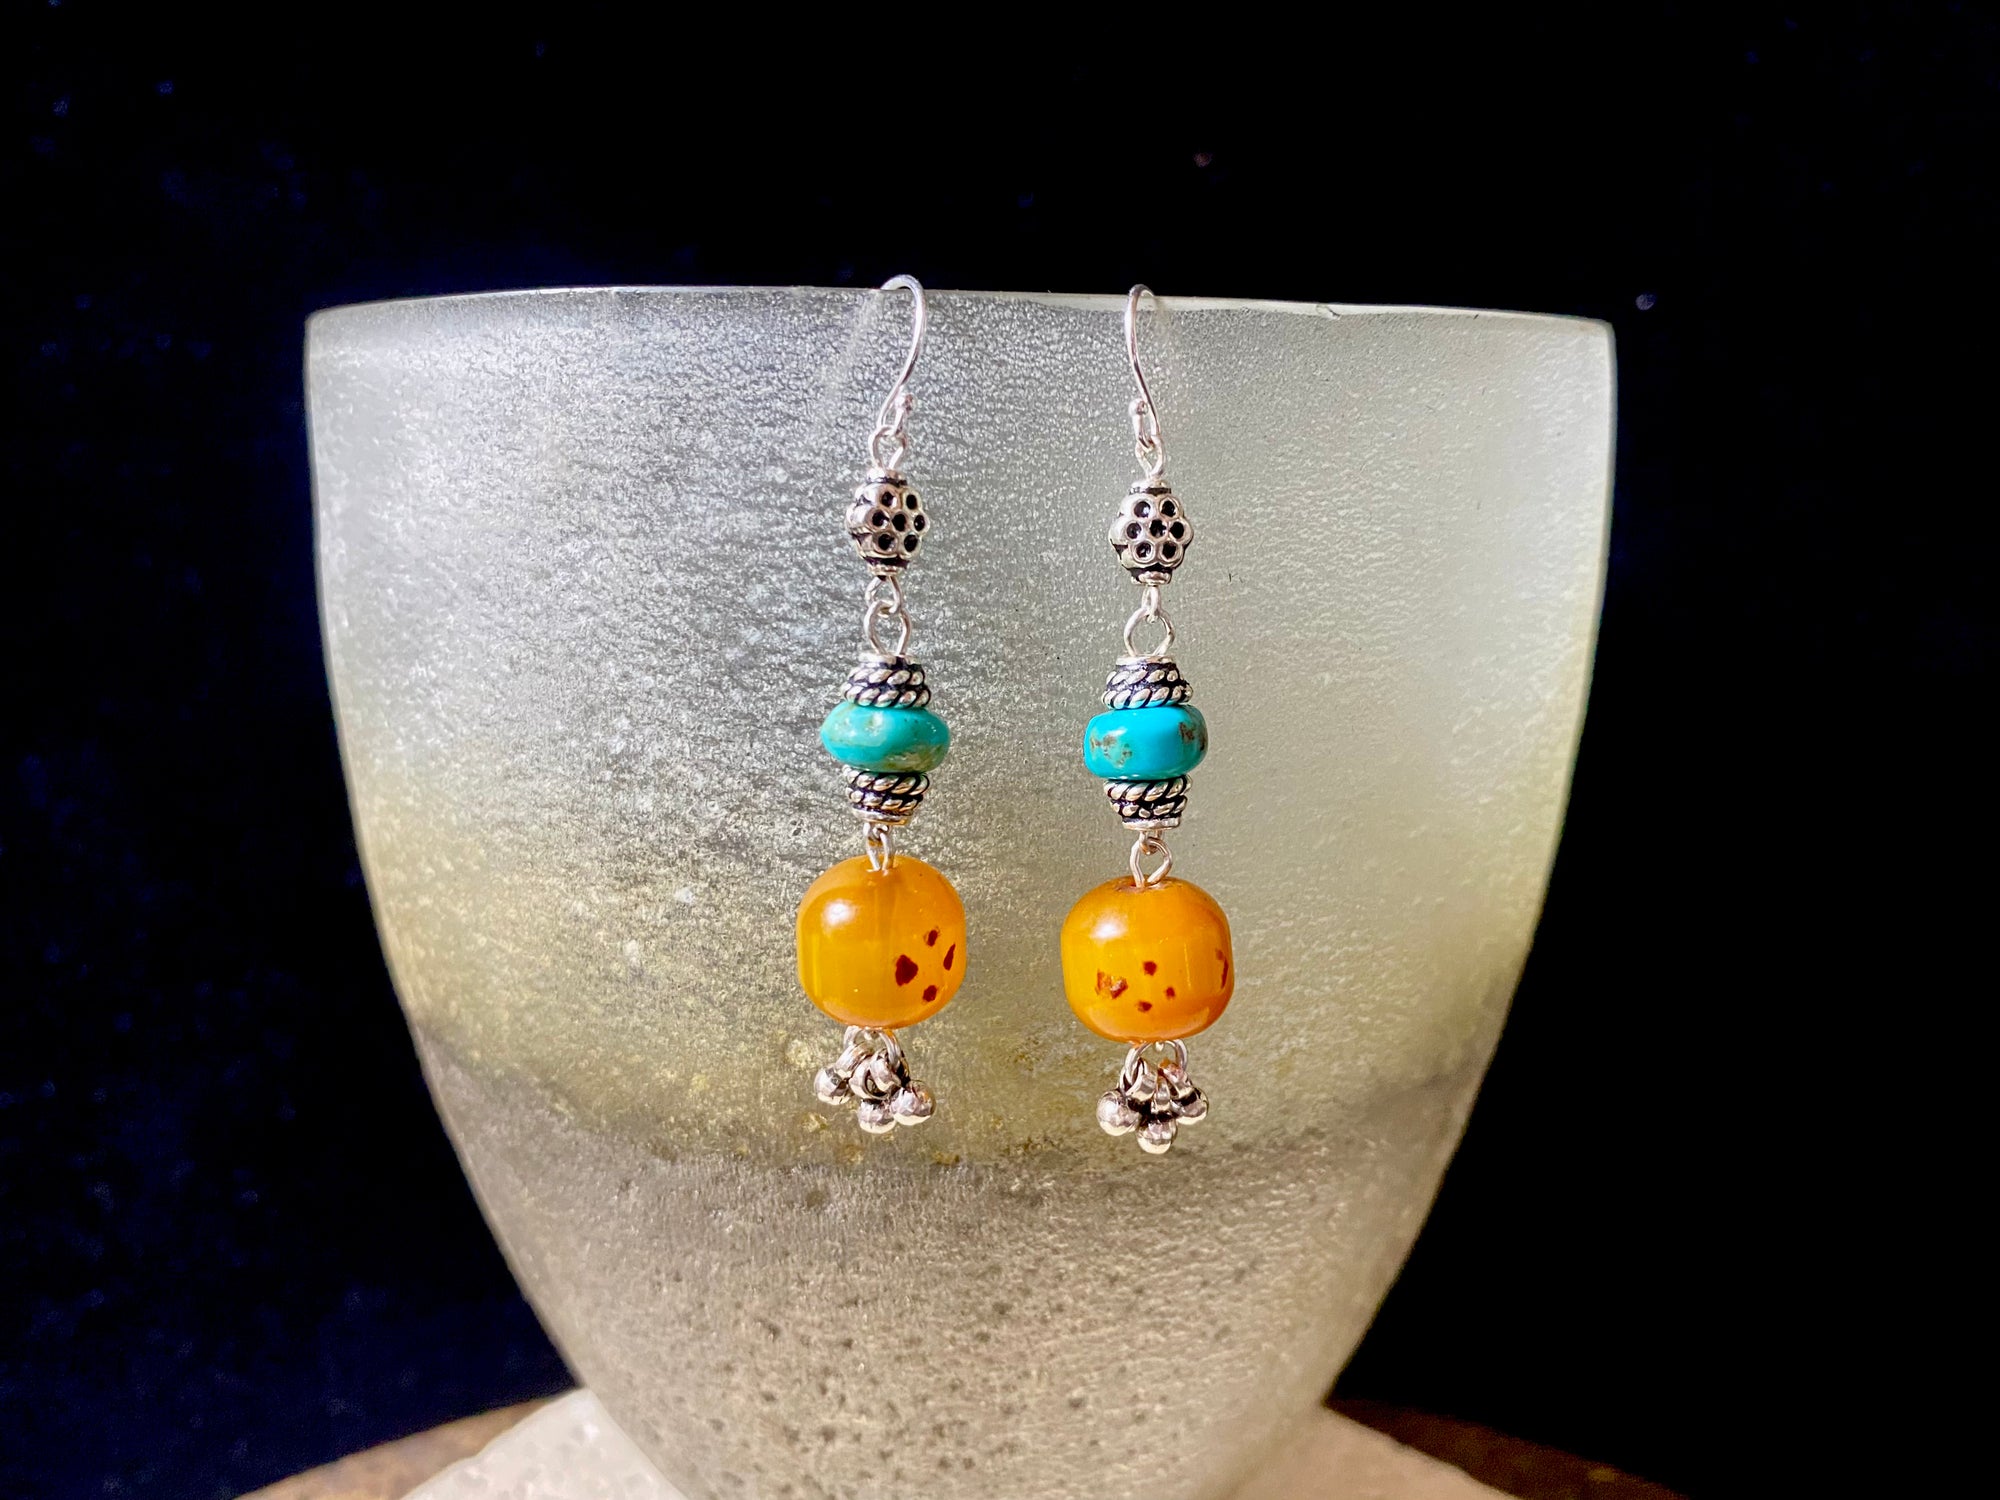 These exotic earrings were created from vintage copal amber beads topped with Arizona turquoise and handmade sterling silver beads, finished with sterling silver hooks.These are a one-off earring design that are very light and easy to wear. Length 5.8 cm including hook